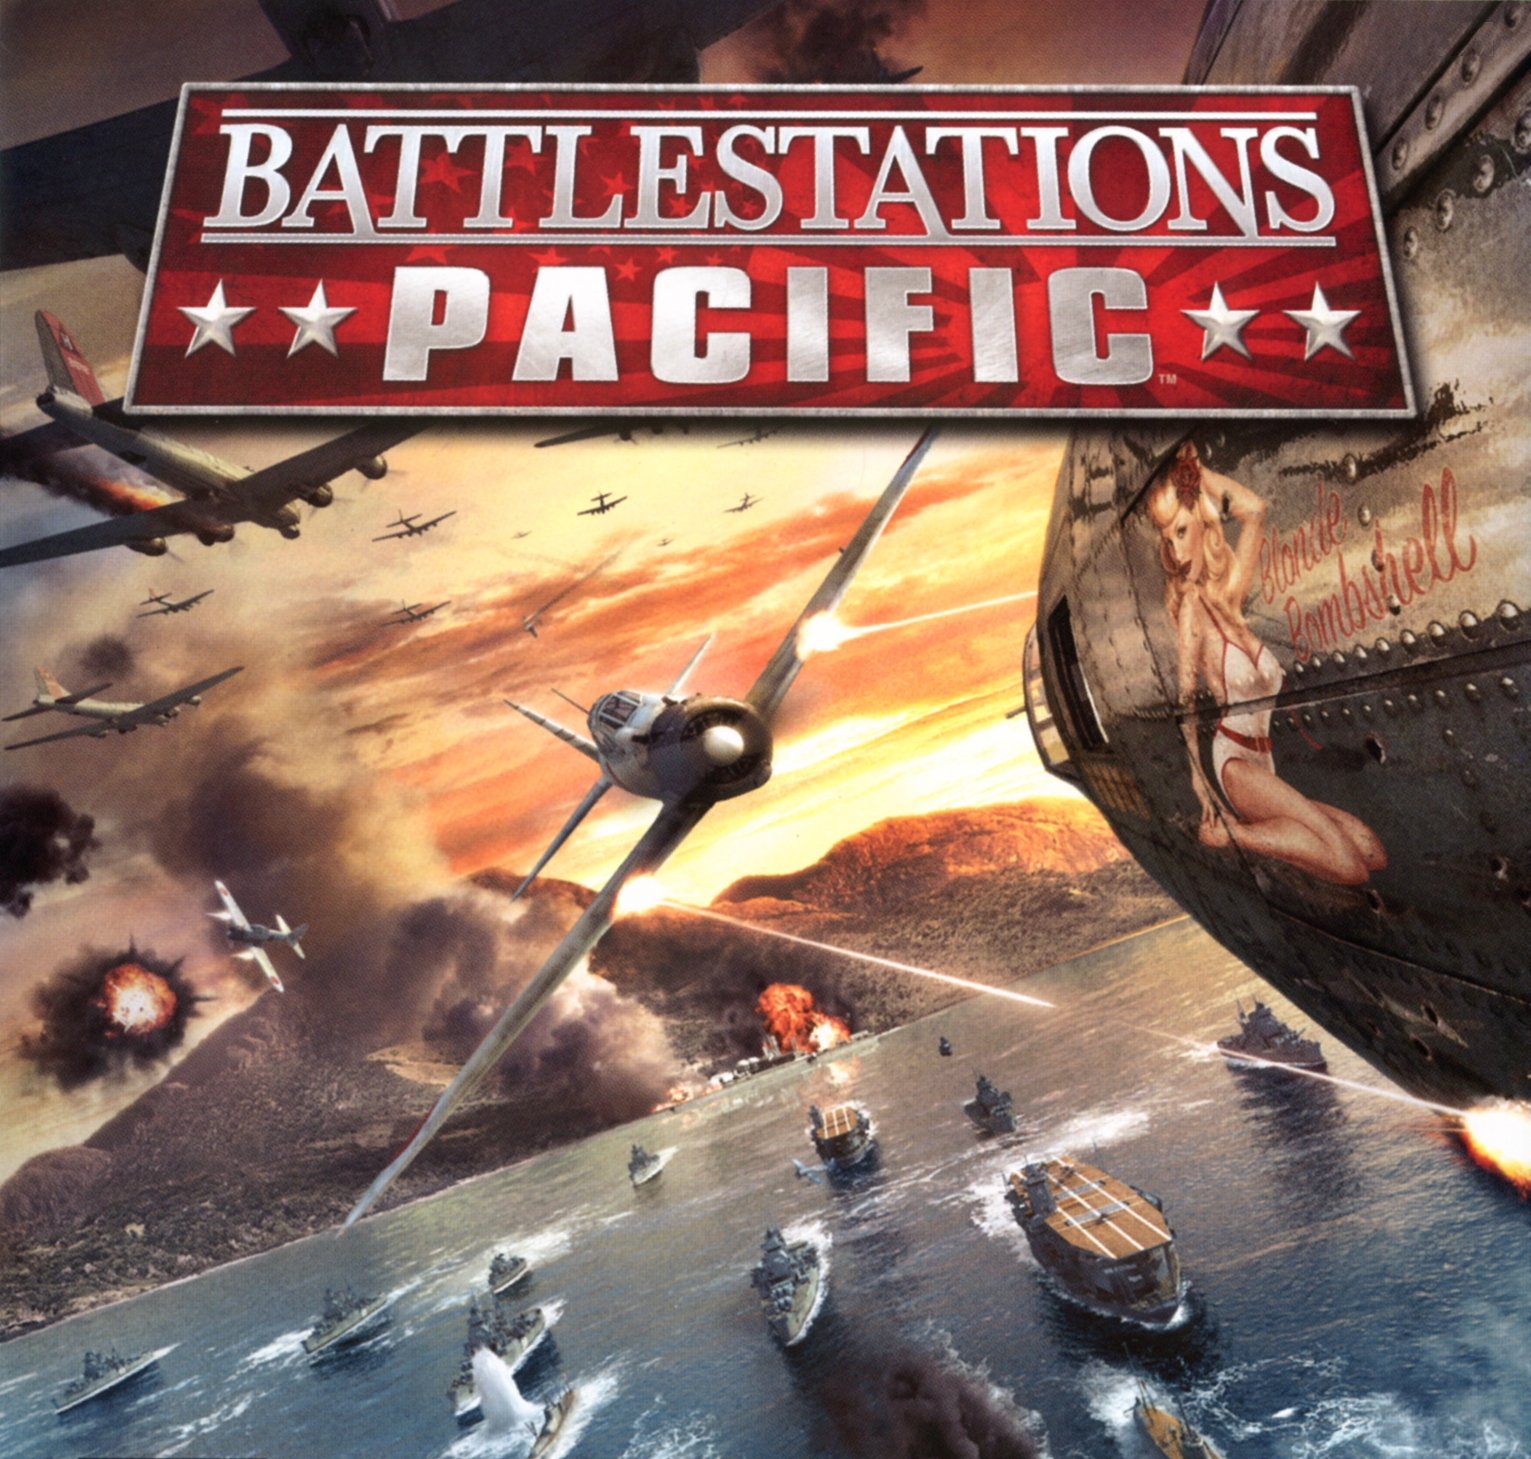 Battlestations Pacific Mp3 Download Battlestations Pacific Soundtracks For Free